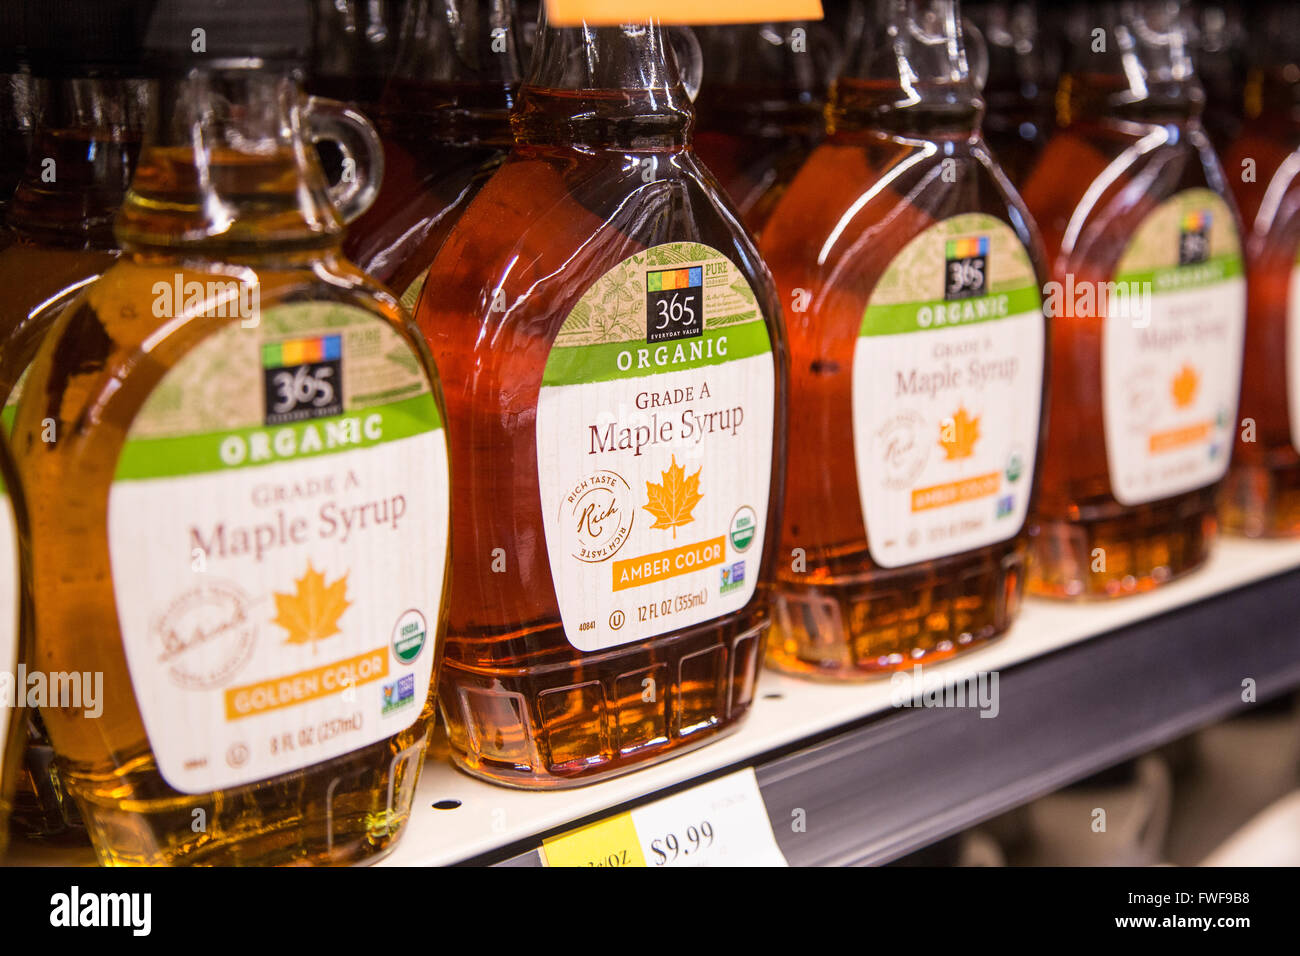 A shelf of organic maple syrup bottles on the shelf of a grocery store. Stock Photo